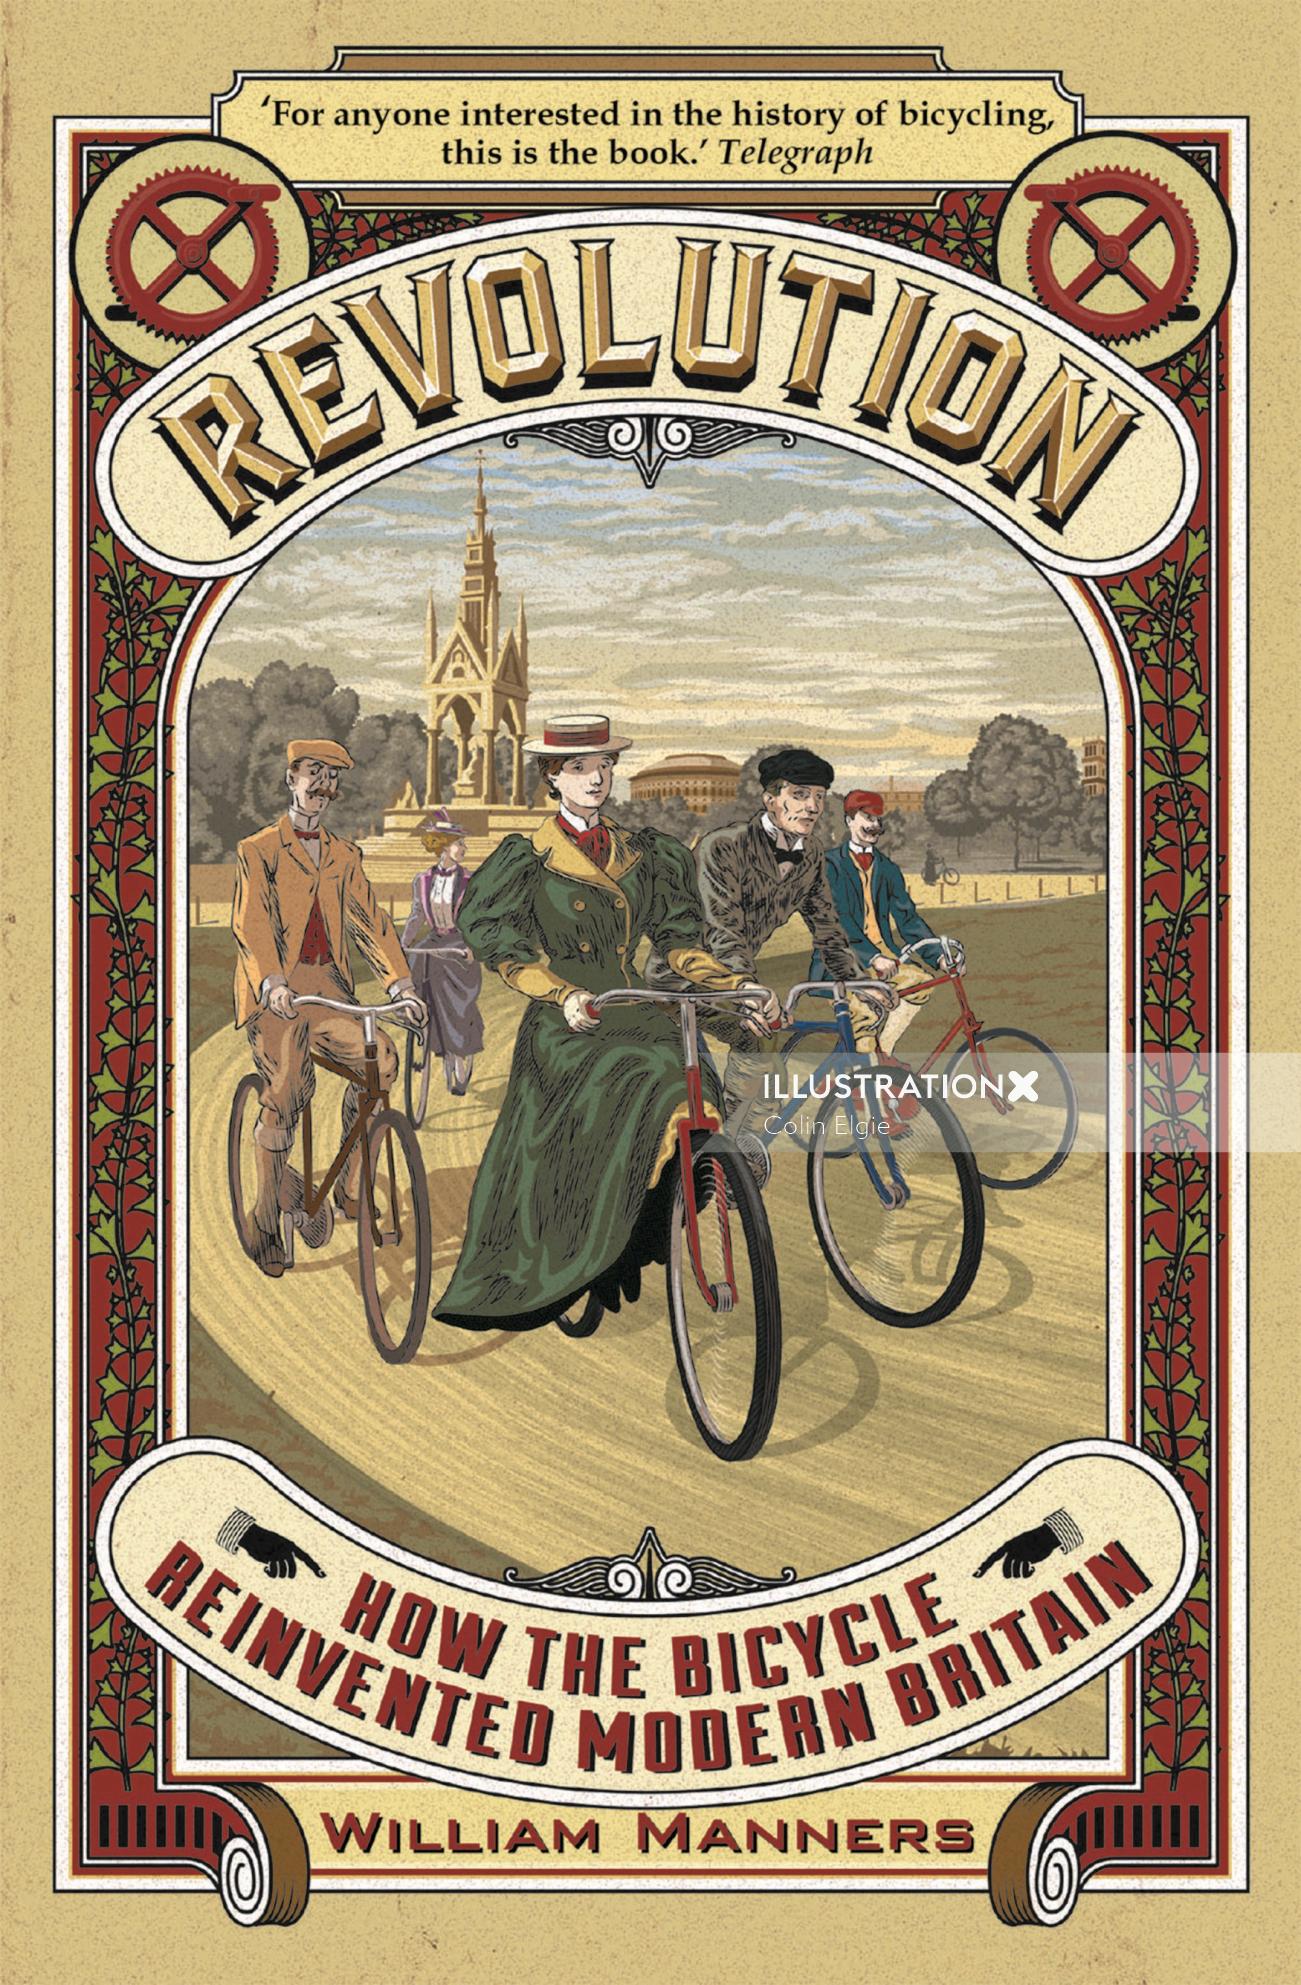 Scene of Victorian-era-inspired bicycling in the park